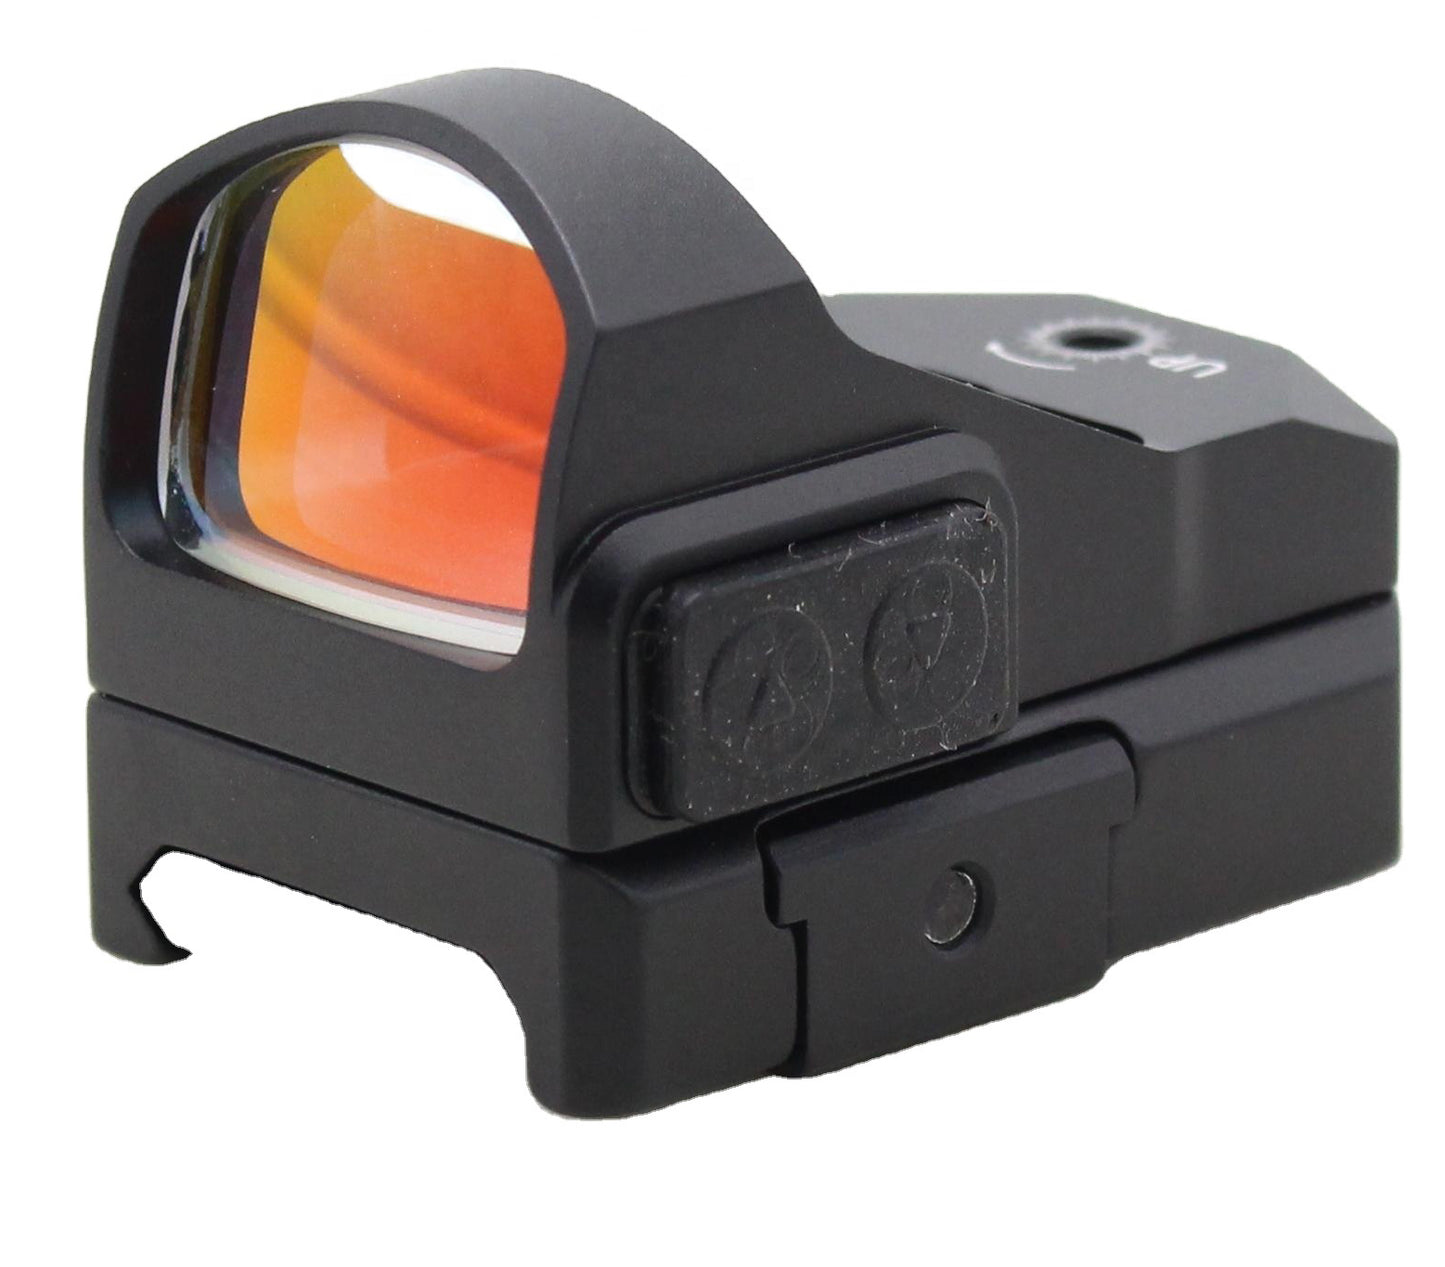 1x 24x17 Power x Obj.Lens Hold Recoil From Caliber .223 1MOA Red Dot Sight